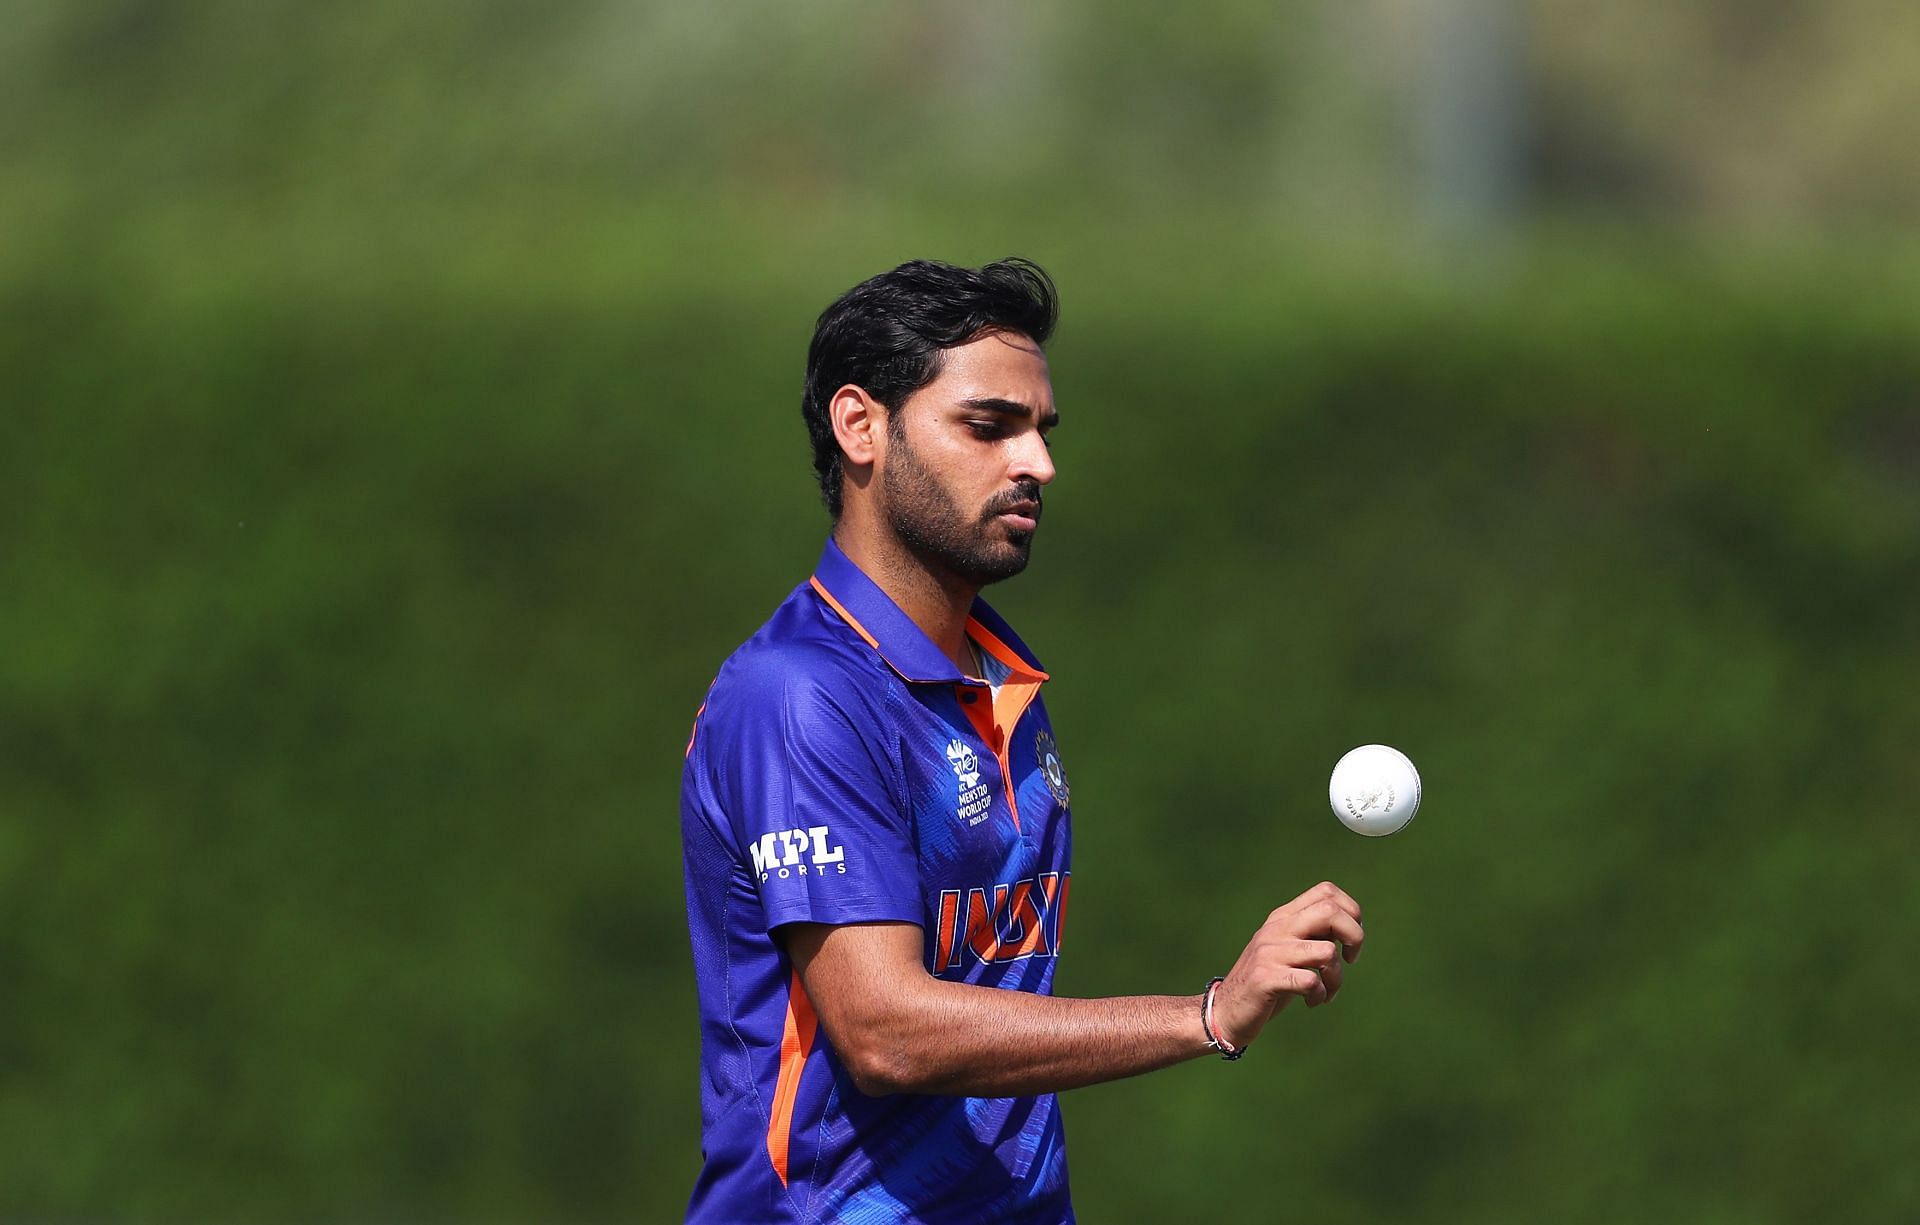 Bhuvneshwar Kumar in action for Team India (Image Credits: ICC via Getty Images)